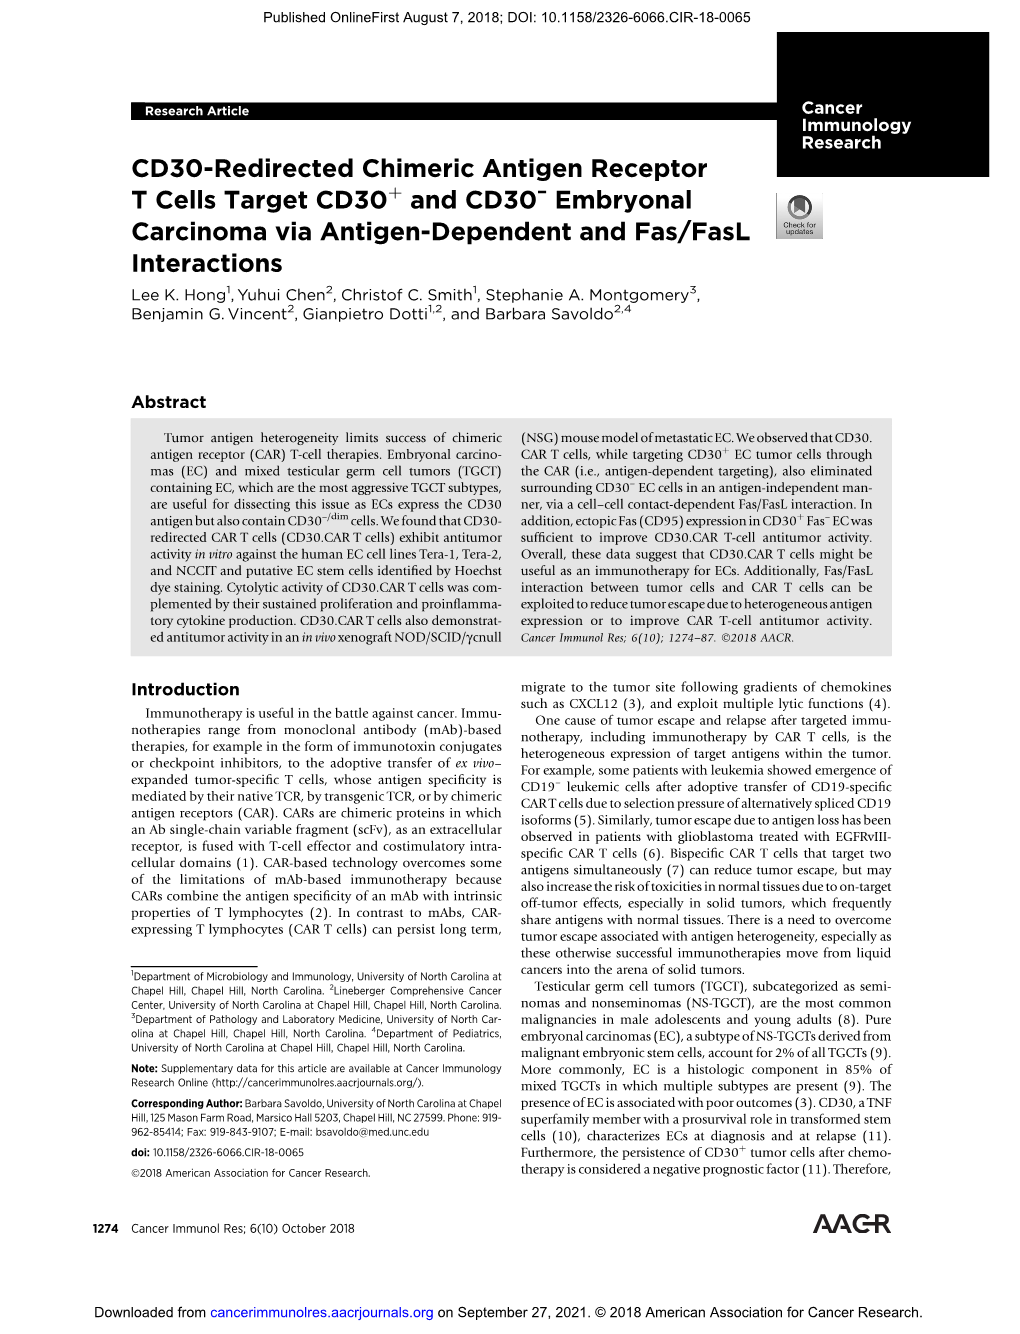 CD30-Redirected Chimeric Antigen Receptor T Cells Target Cd30þ and CD30– Embryonal Carcinoma Via Antigen-Dependent and Fas/Fasl Interactions Lee K